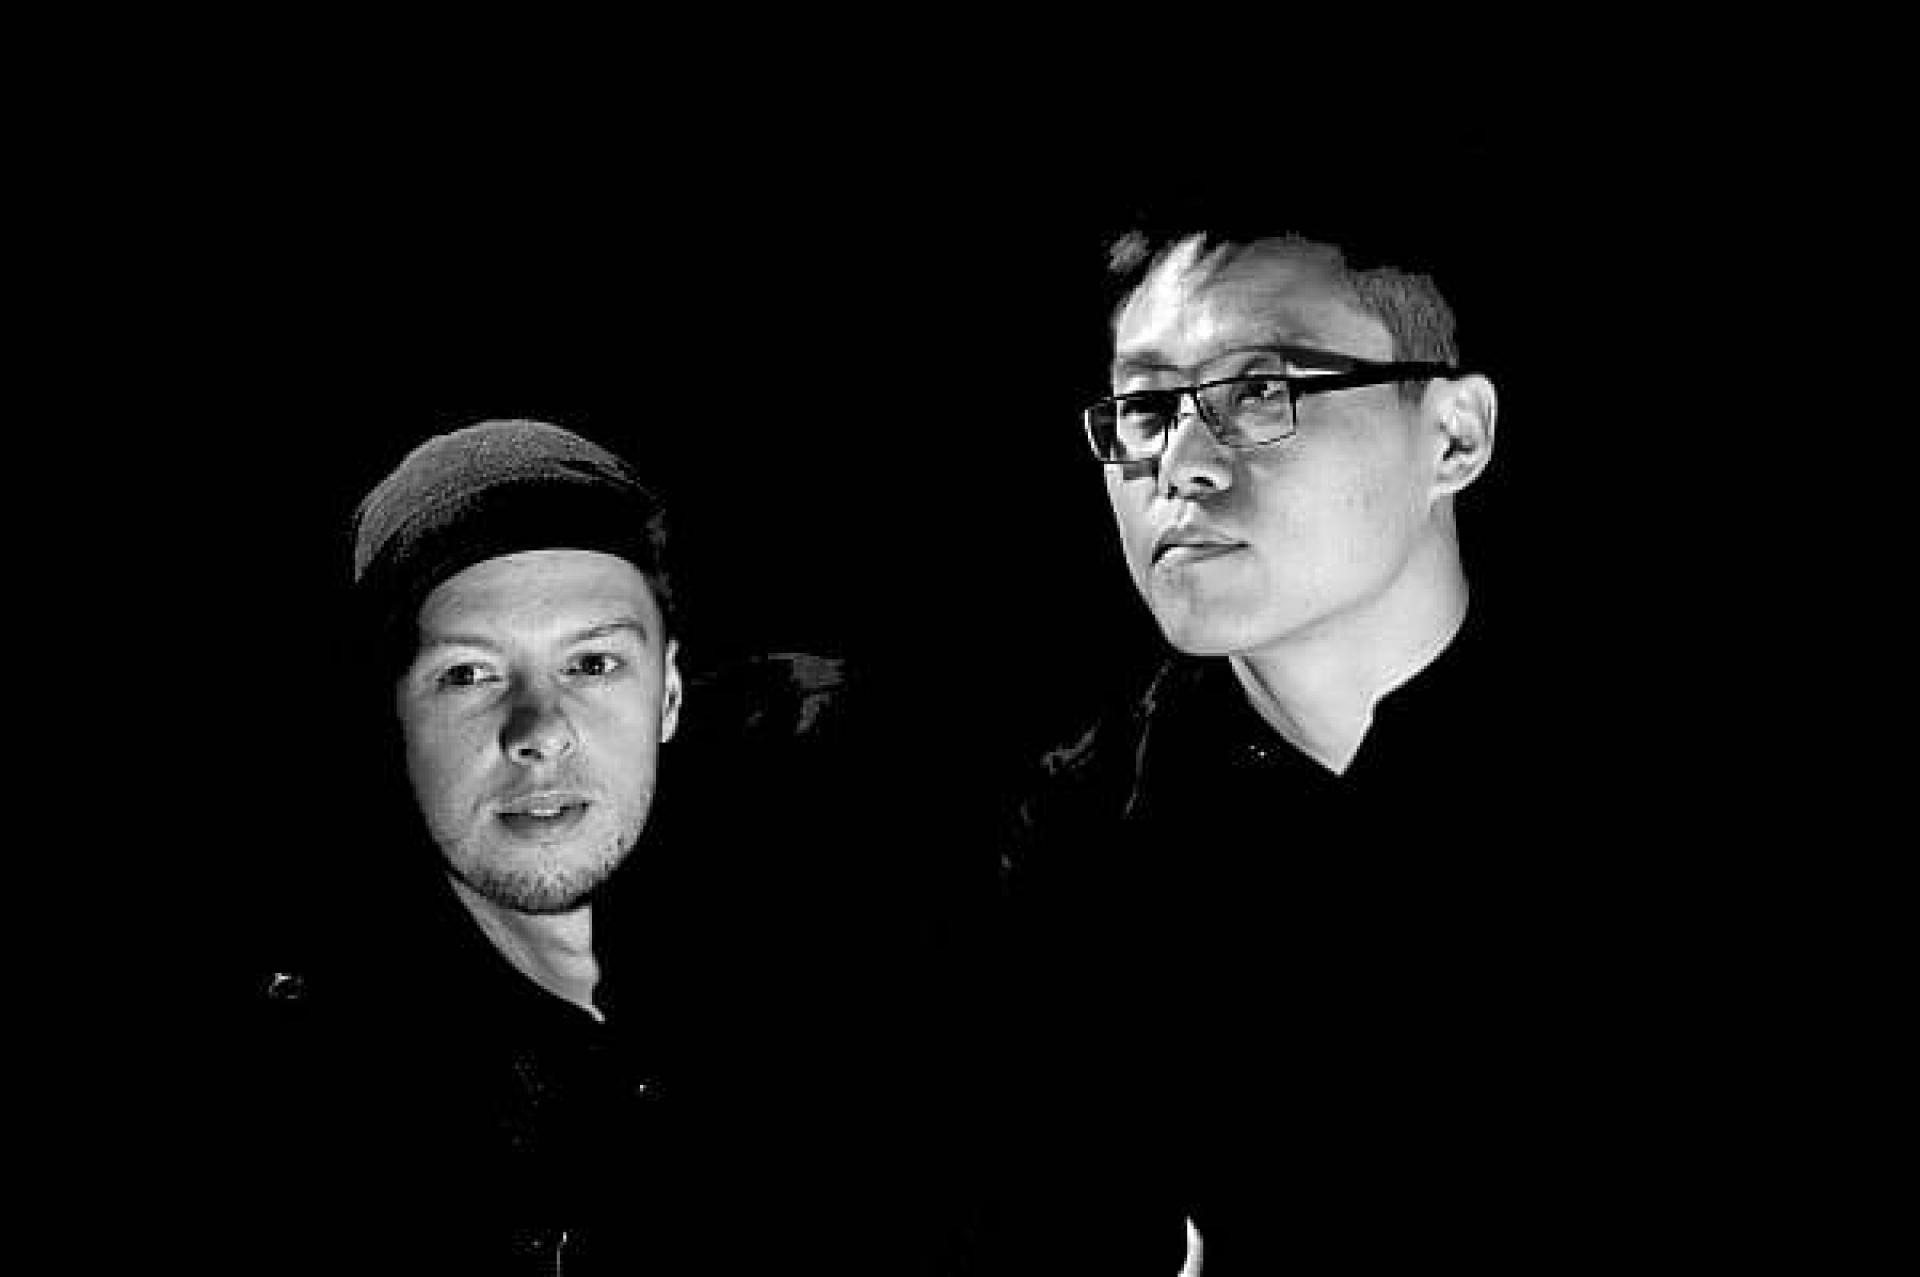 Chris Precht and Dayong Sun are forming Penda and are based between Beijing and Vienna. | Photo by Divisare